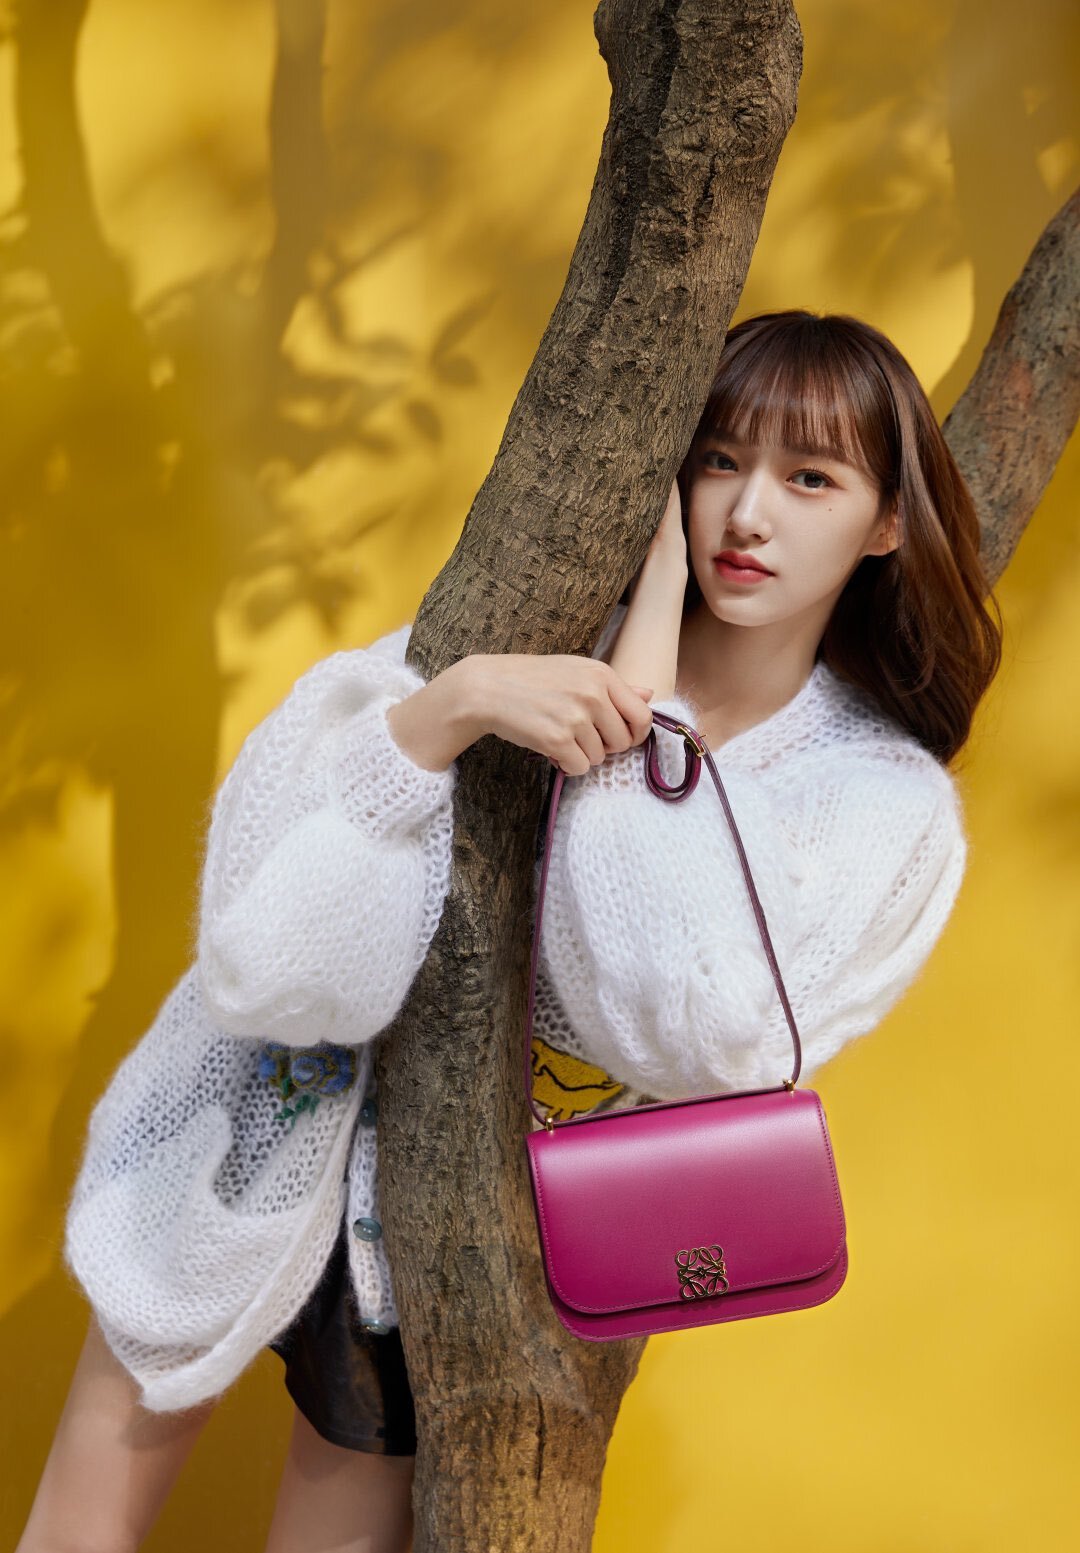 cheng xiao updates on X: cheng xiao has put her 160,000 yuan / 23,200  dollar chanel bird cage bag to use her pet doesn't love the fancy cage  though 😂 looks like